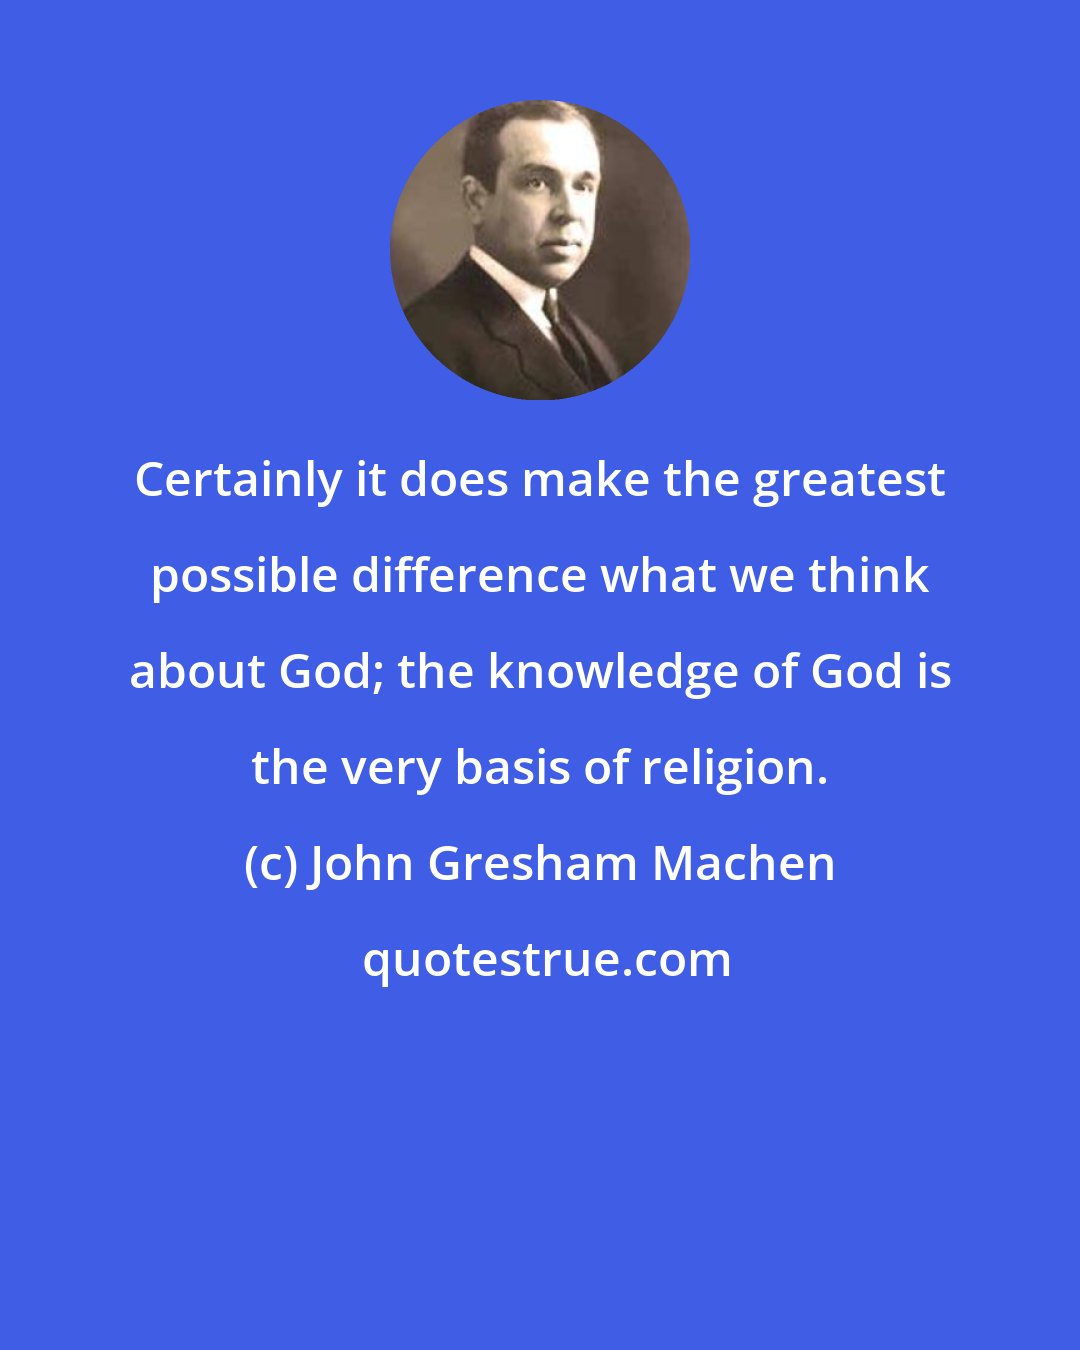 John Gresham Machen: Certainly it does make the greatest possible difference what we think about God; the knowledge of God is the very basis of religion.